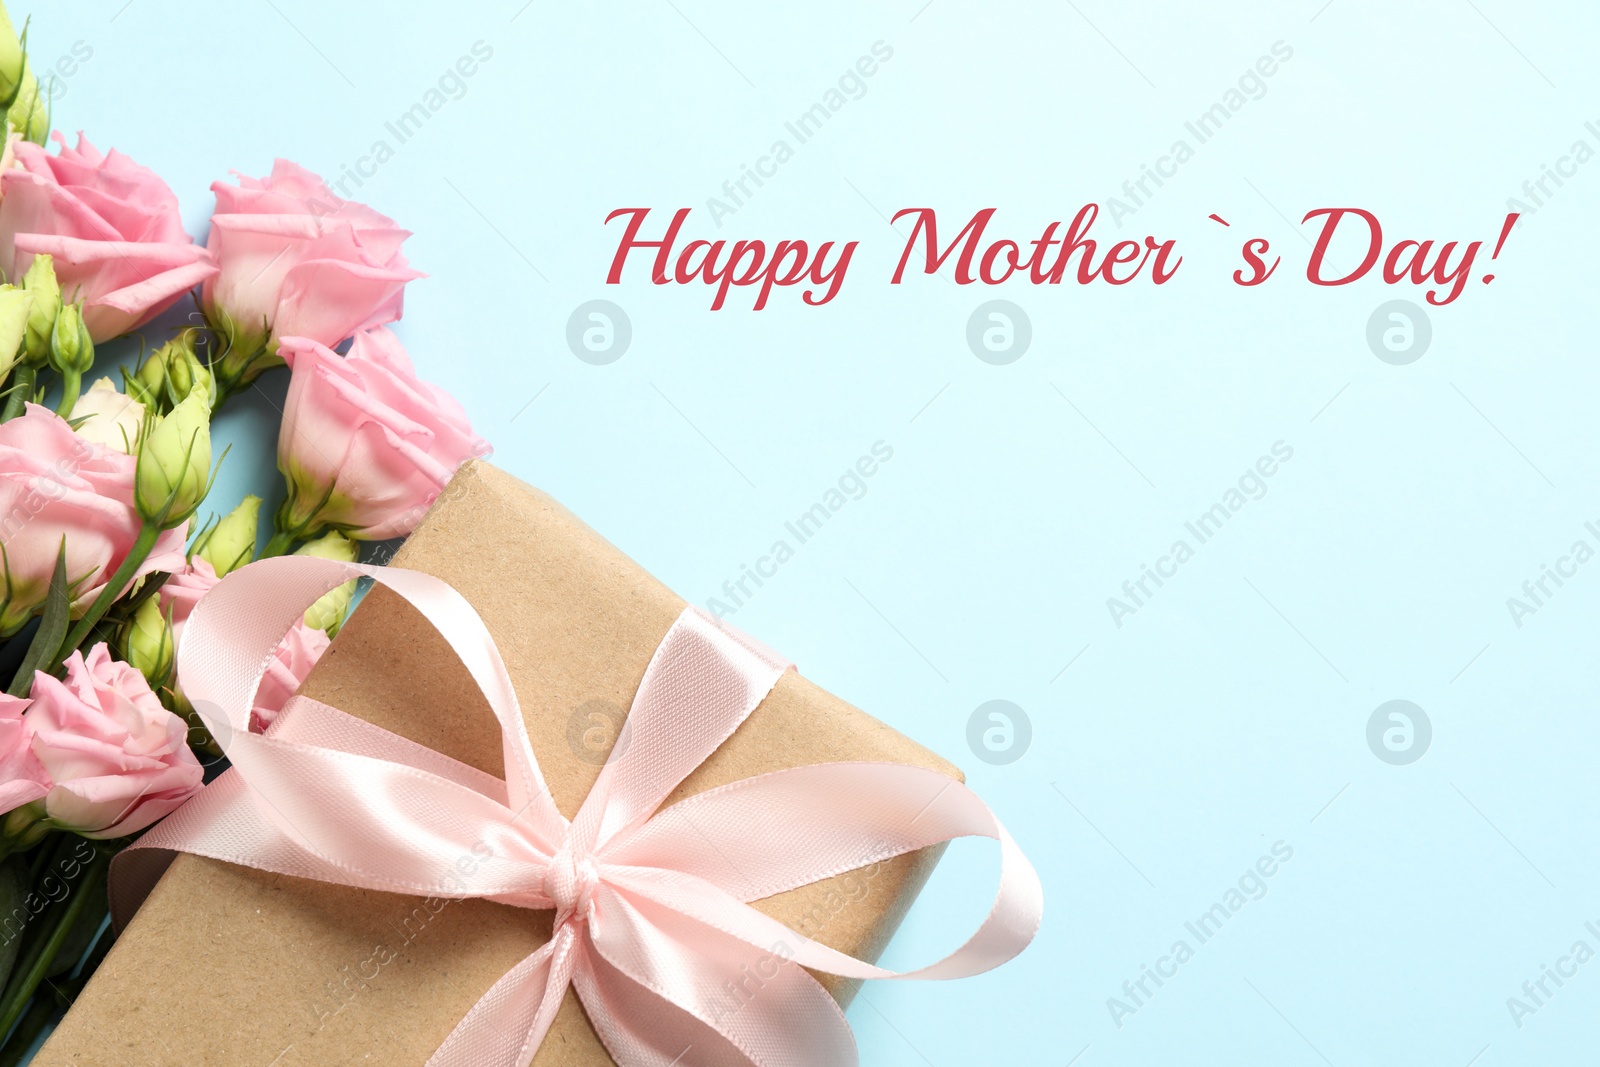 Image of Happy Mother's Day greeting card. Beautiful flowers and gift box on light blue background